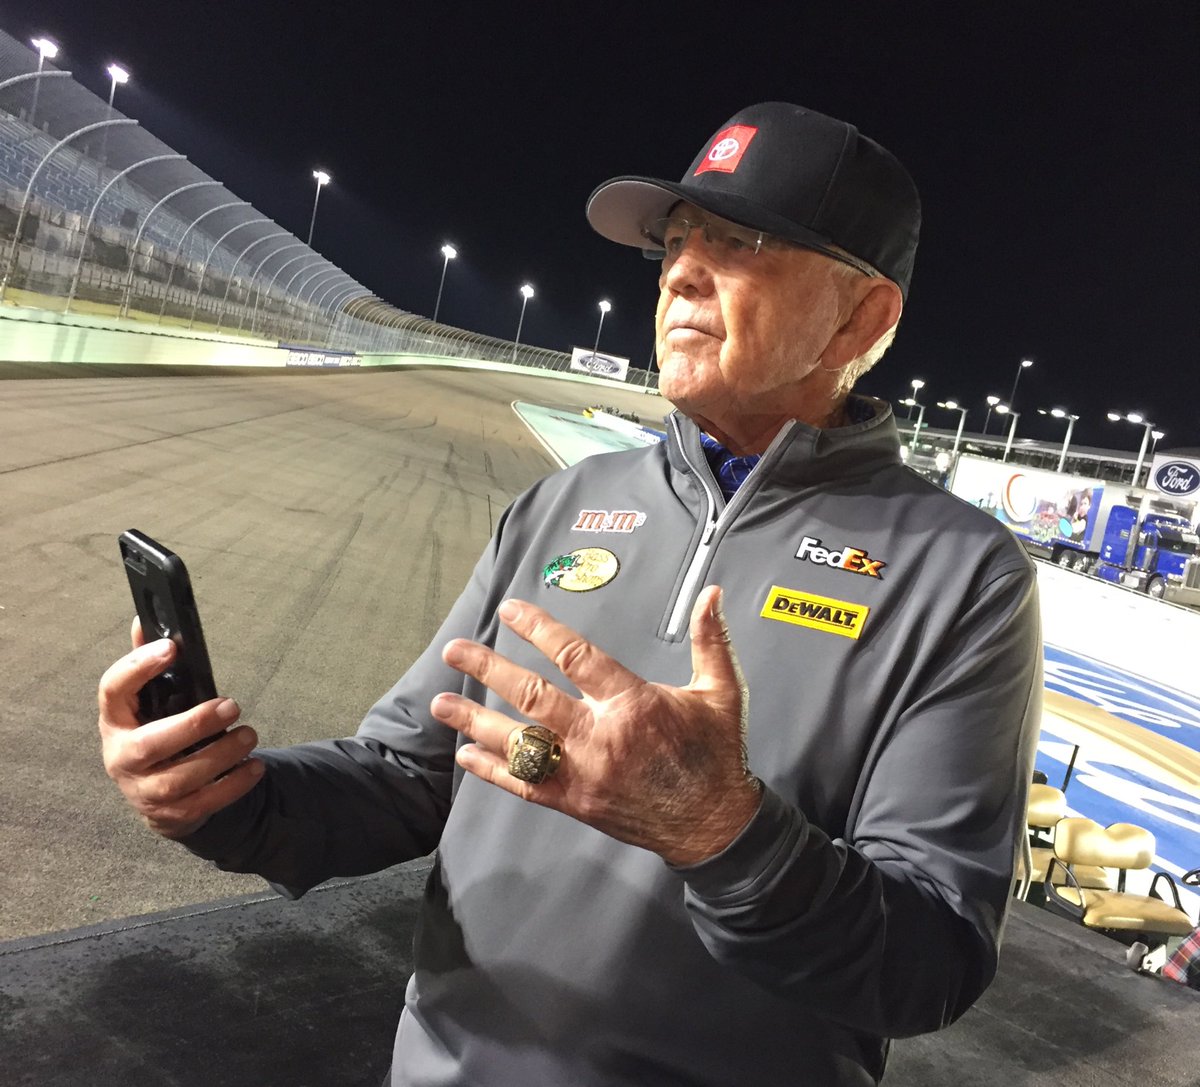 The only conversation I’ve ever had with Coach Joe Gibbs was brief. It was after this year’s finale.

“Congrats on the title, Coach. Do you do selfie videos?”

“Absolutely,” he said.

He then went on to tell a story that nearly brought me to tears. 

Congrats, Coach. #NASCARHOFer